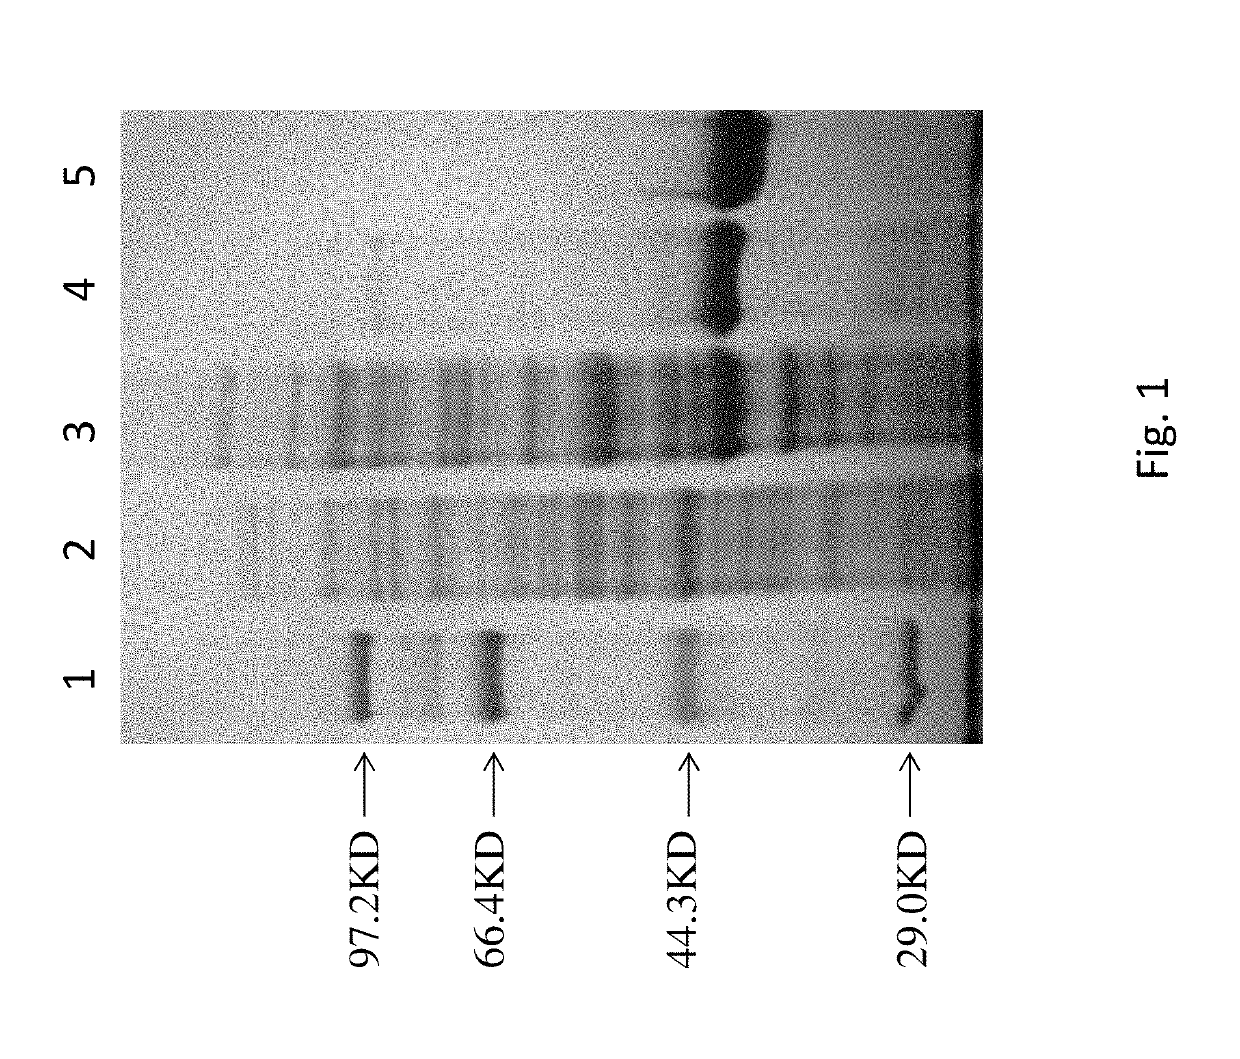 DNA Polymerase Mutants with Increased Processivity of DNA Synthesis